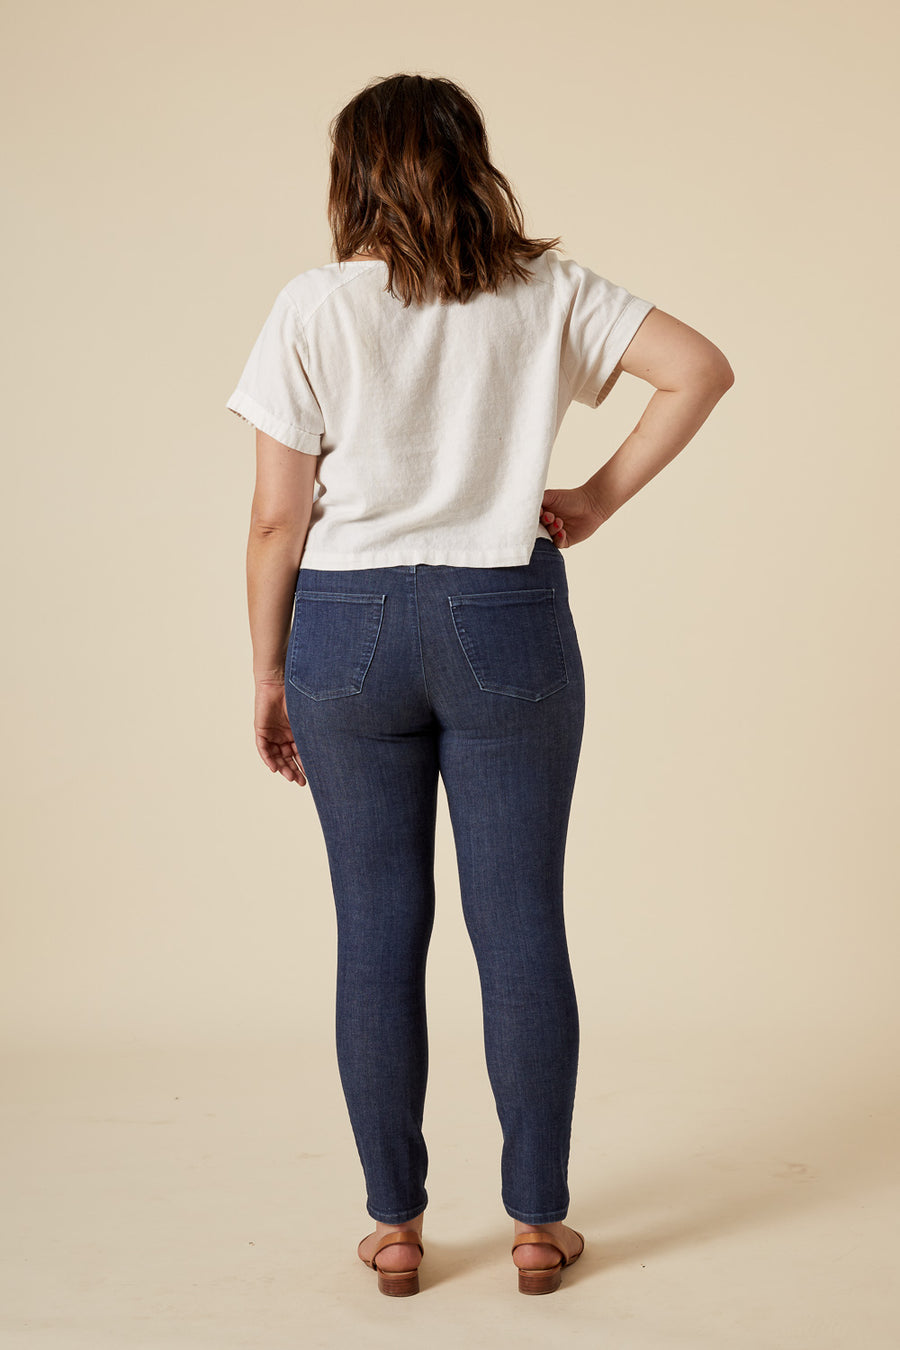 Ginger Jeans pattern | Skinny Jeans Pattern I Sewing pattern by Closet Core Patterns